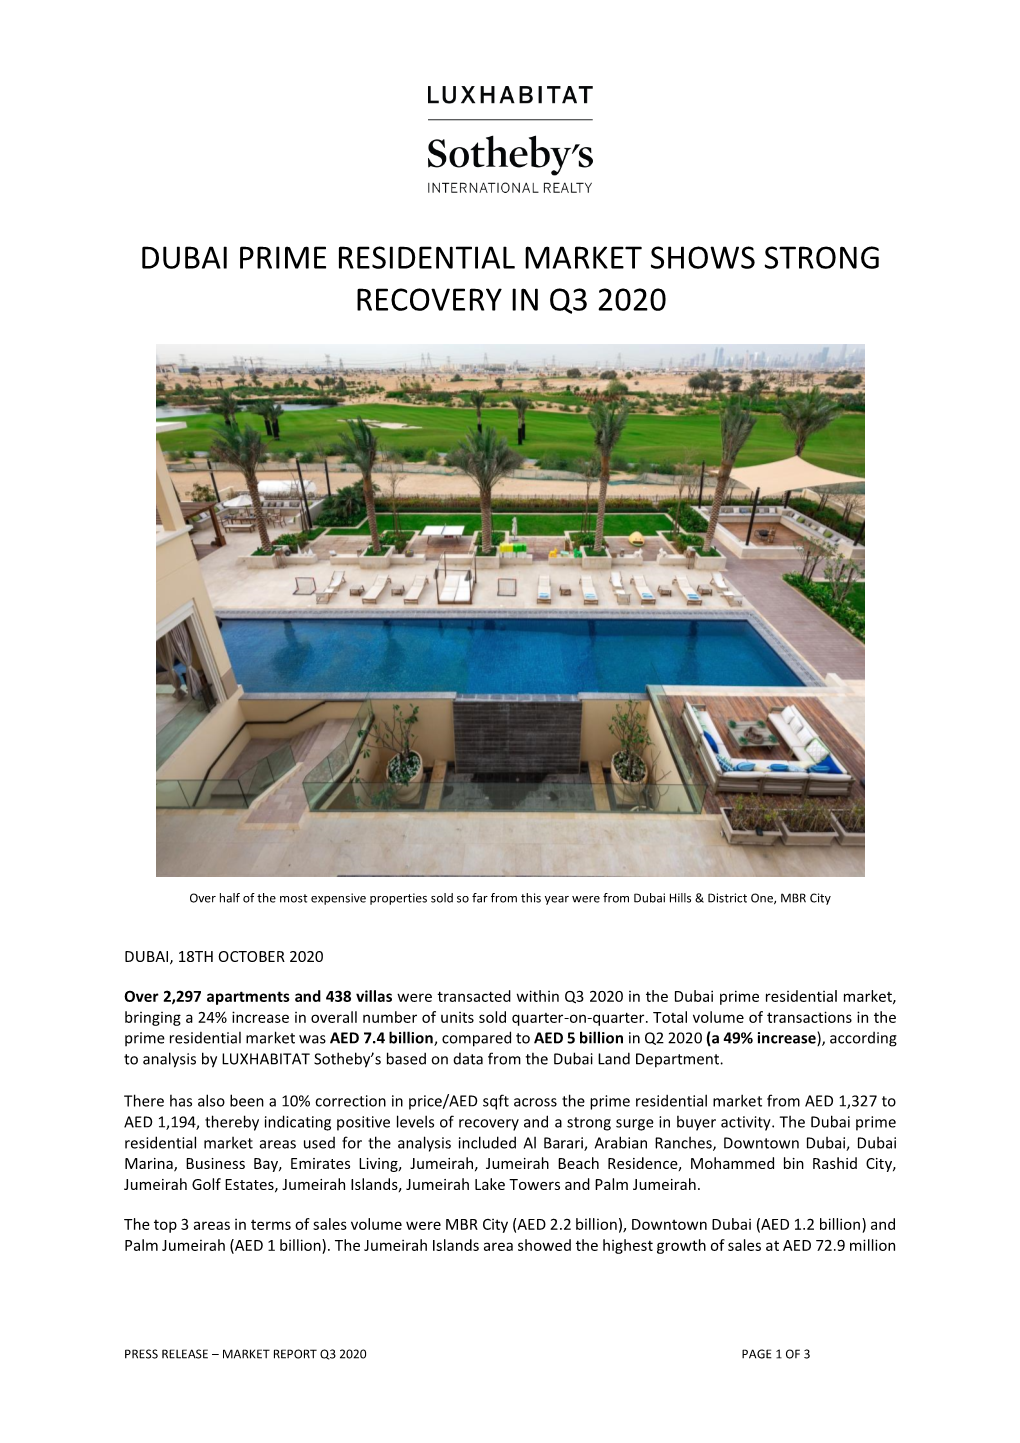 Dubai Prime Residential Market Shows Strong Recovery in Q3 2020